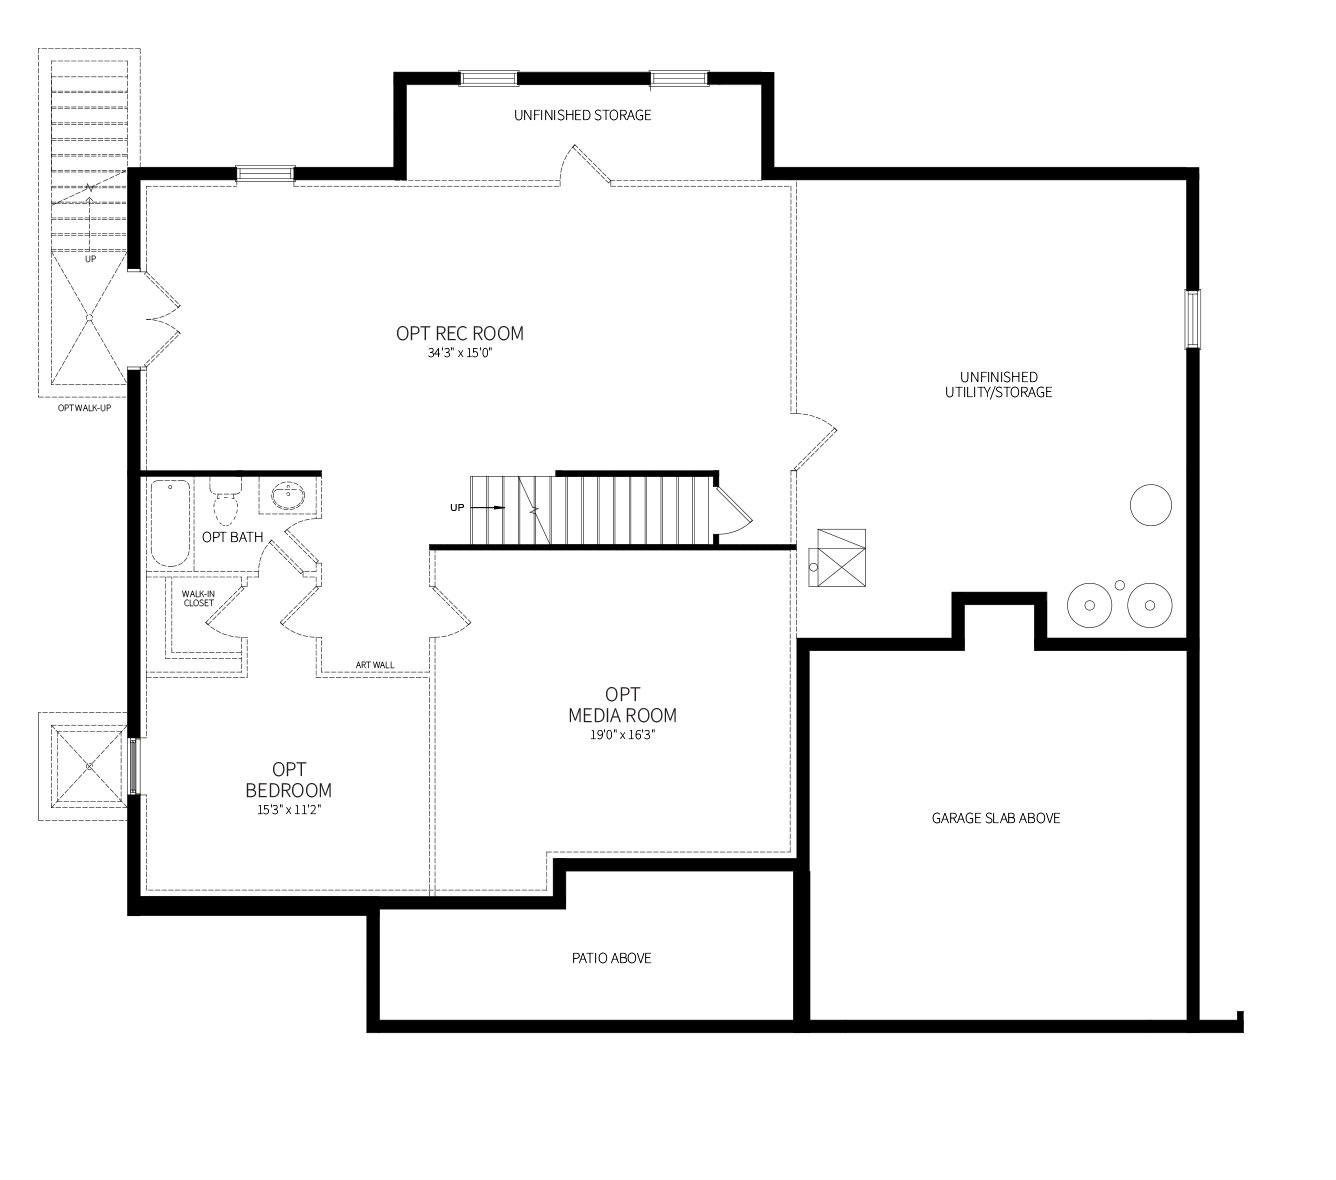 The optional basement plan for the Hampden model home, an updated center hall colonial layout.